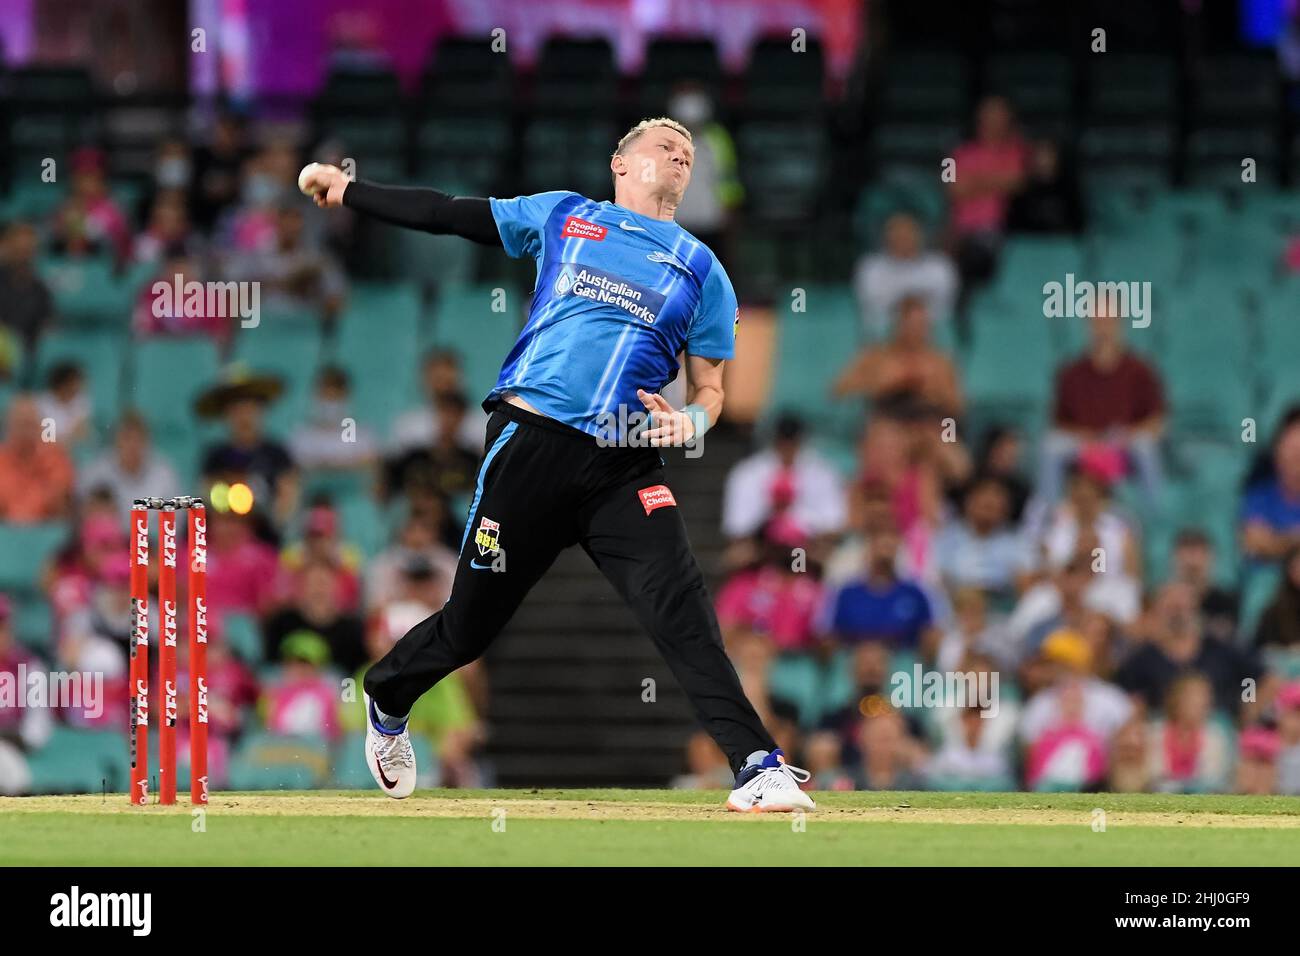 Sydney, Australia, 26 January, 2022. Peter Siddle of the Strikers bowls during the Big Bash League Challenger cricket match between Sydney Sixers and Adelaide Strikers at The Sydney Cricket Ground on January 26, 2022 in Sydney, Australia. Credit: Steven Markham/Speed Media/Alamy Live News Stock Photo